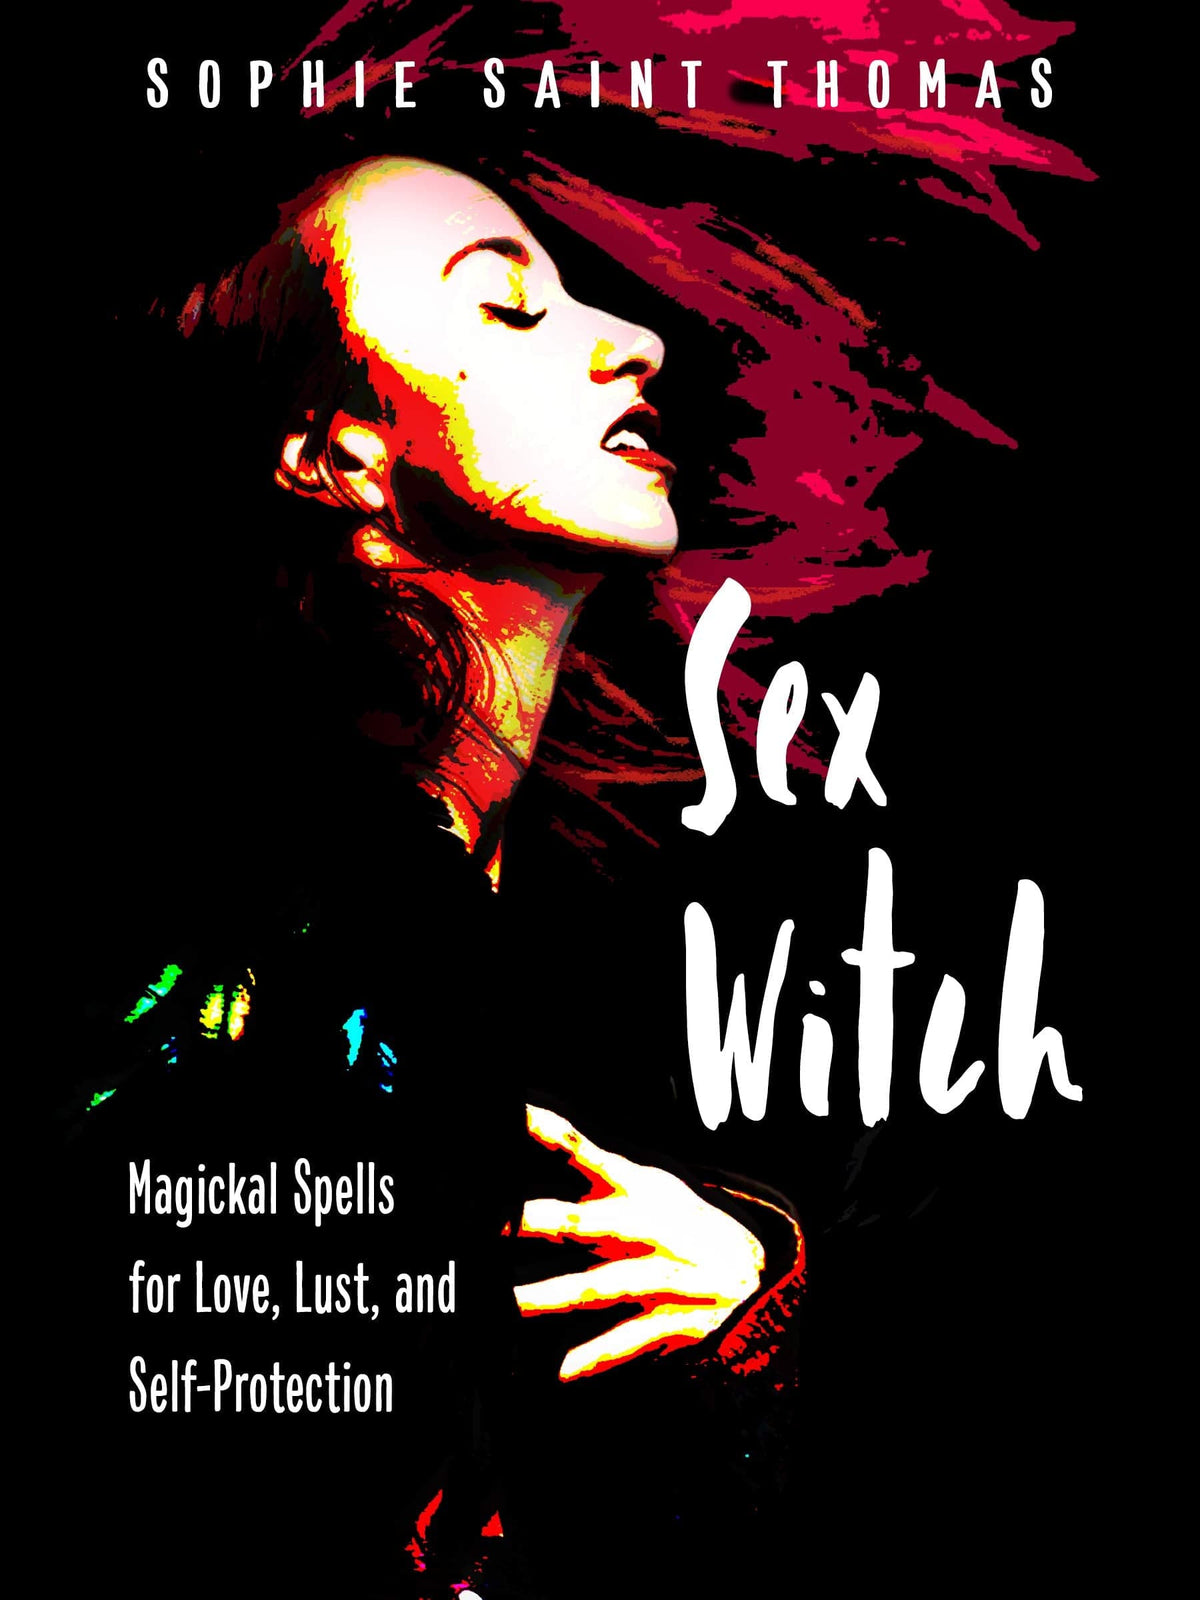 Sex Witch: Magickal Spells for Love Lust and Self-Protection - Third Eye